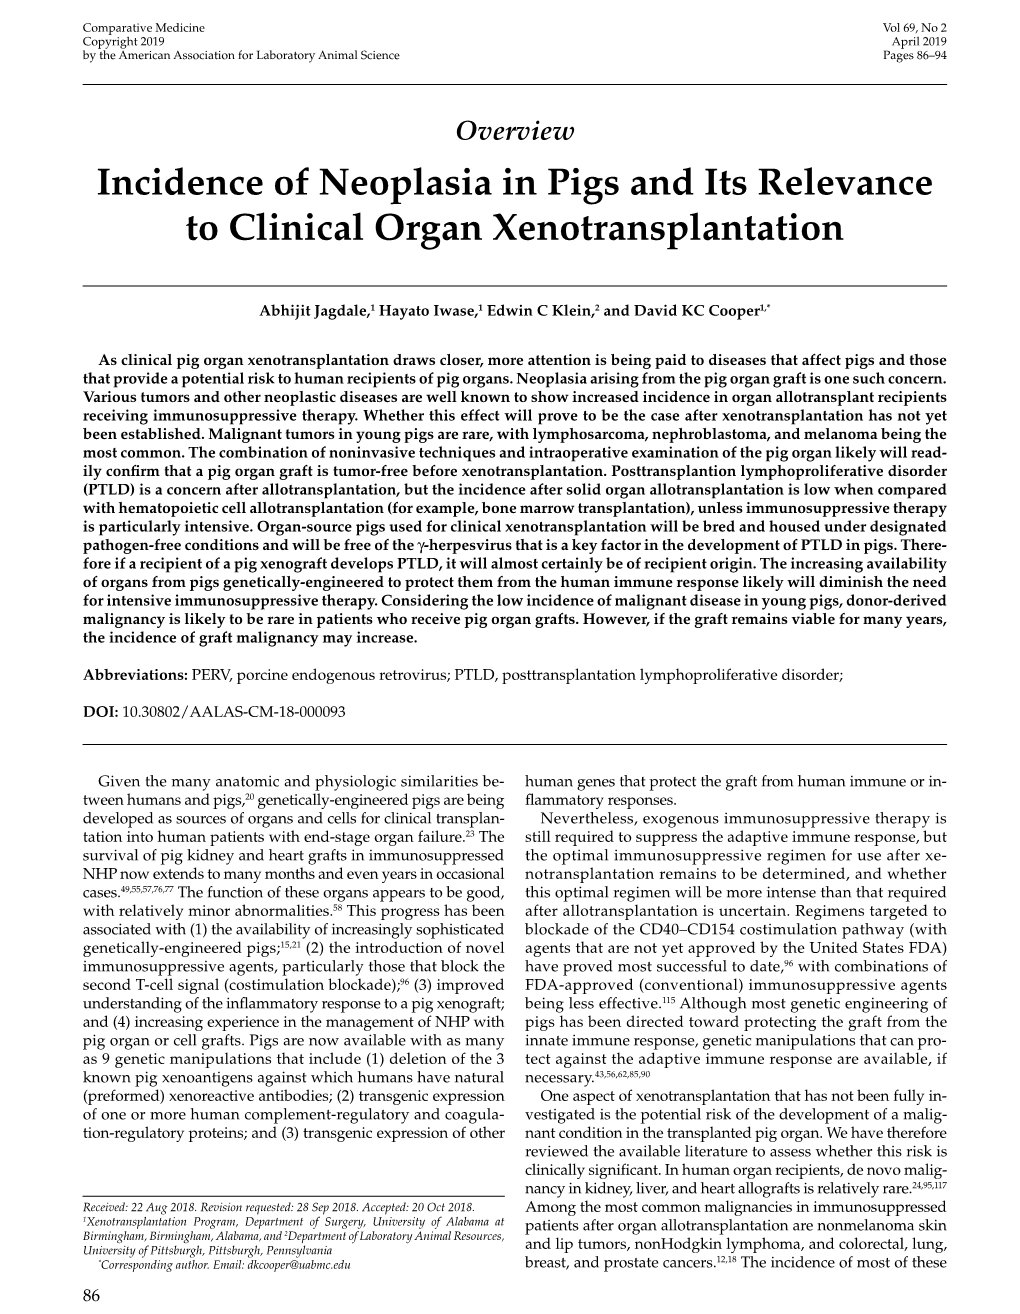 Incidence of Neoplasia in Pigs and Its Relevance to Clinical Organ Xenotransplantation